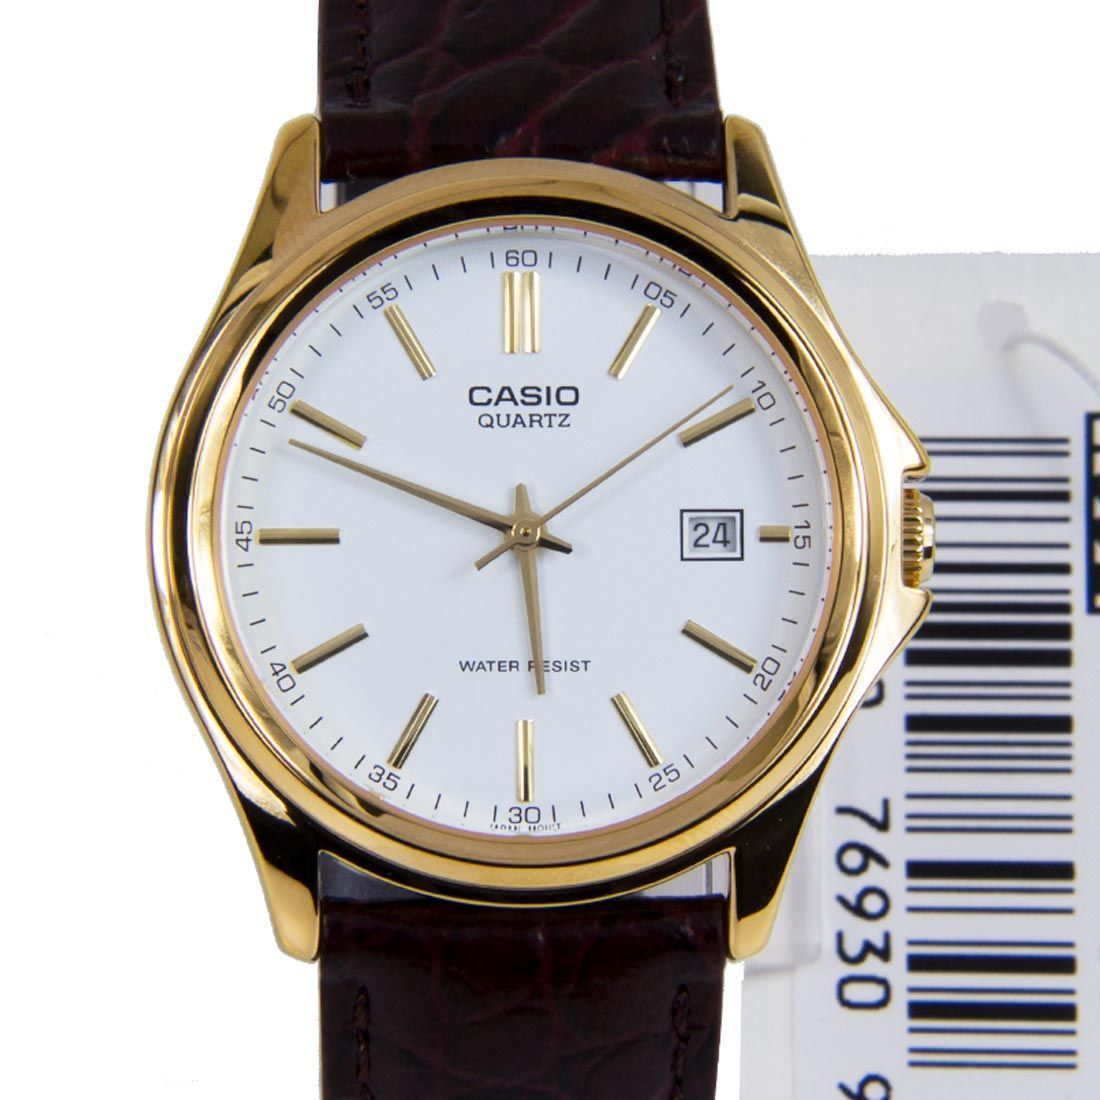 Casio Mens Quartz Watch with Leather Strap and Gold Bezel. MTP1183Q-7A